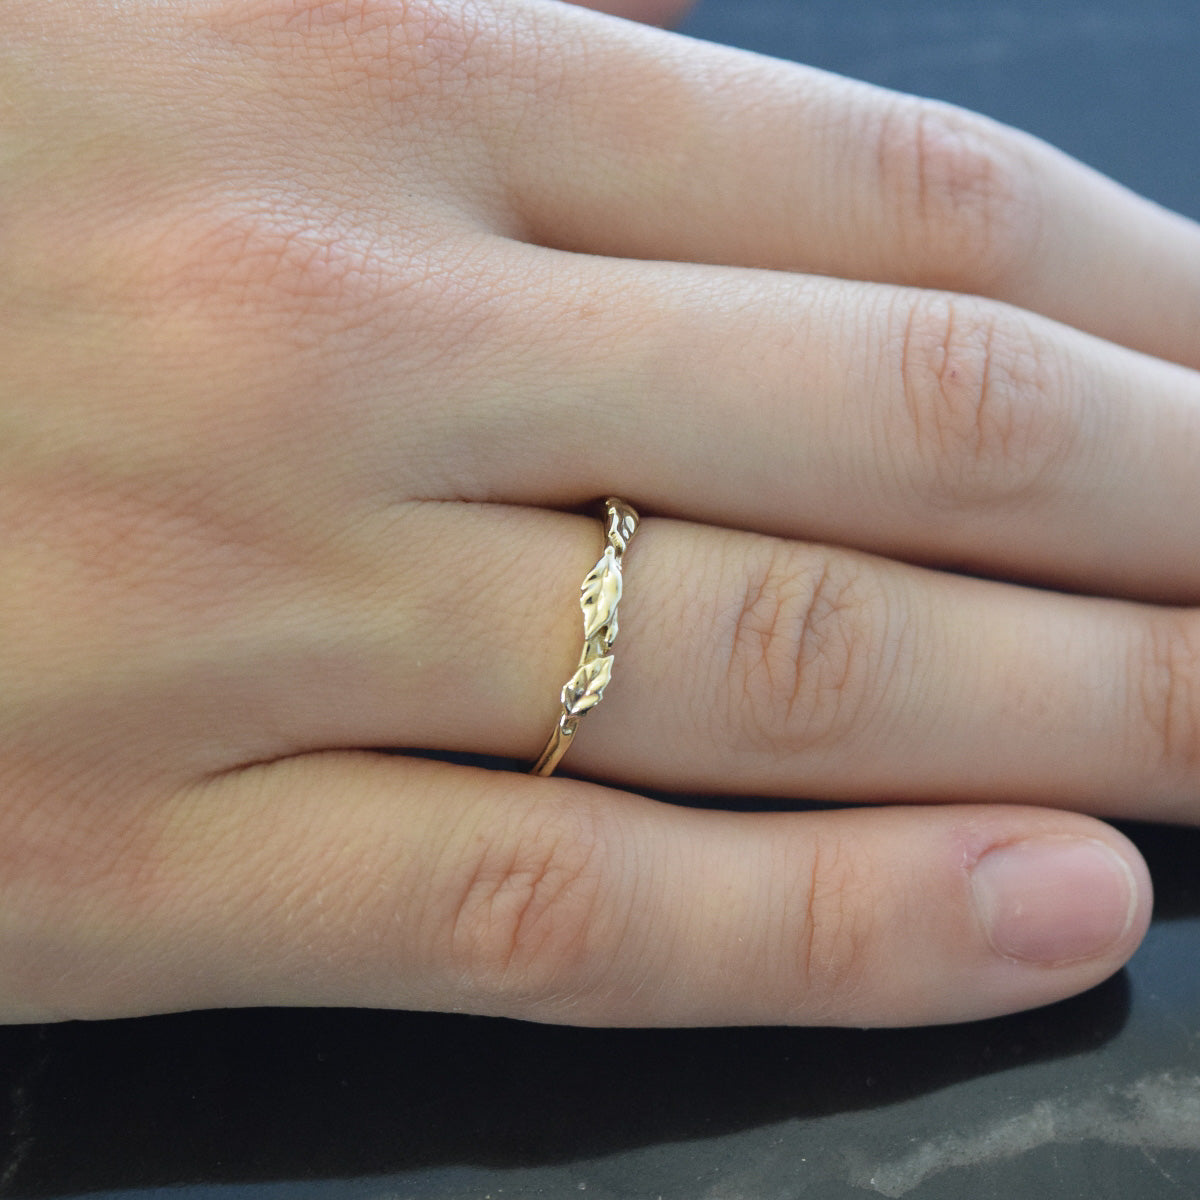 yellow gold wedding band with leaves on finger